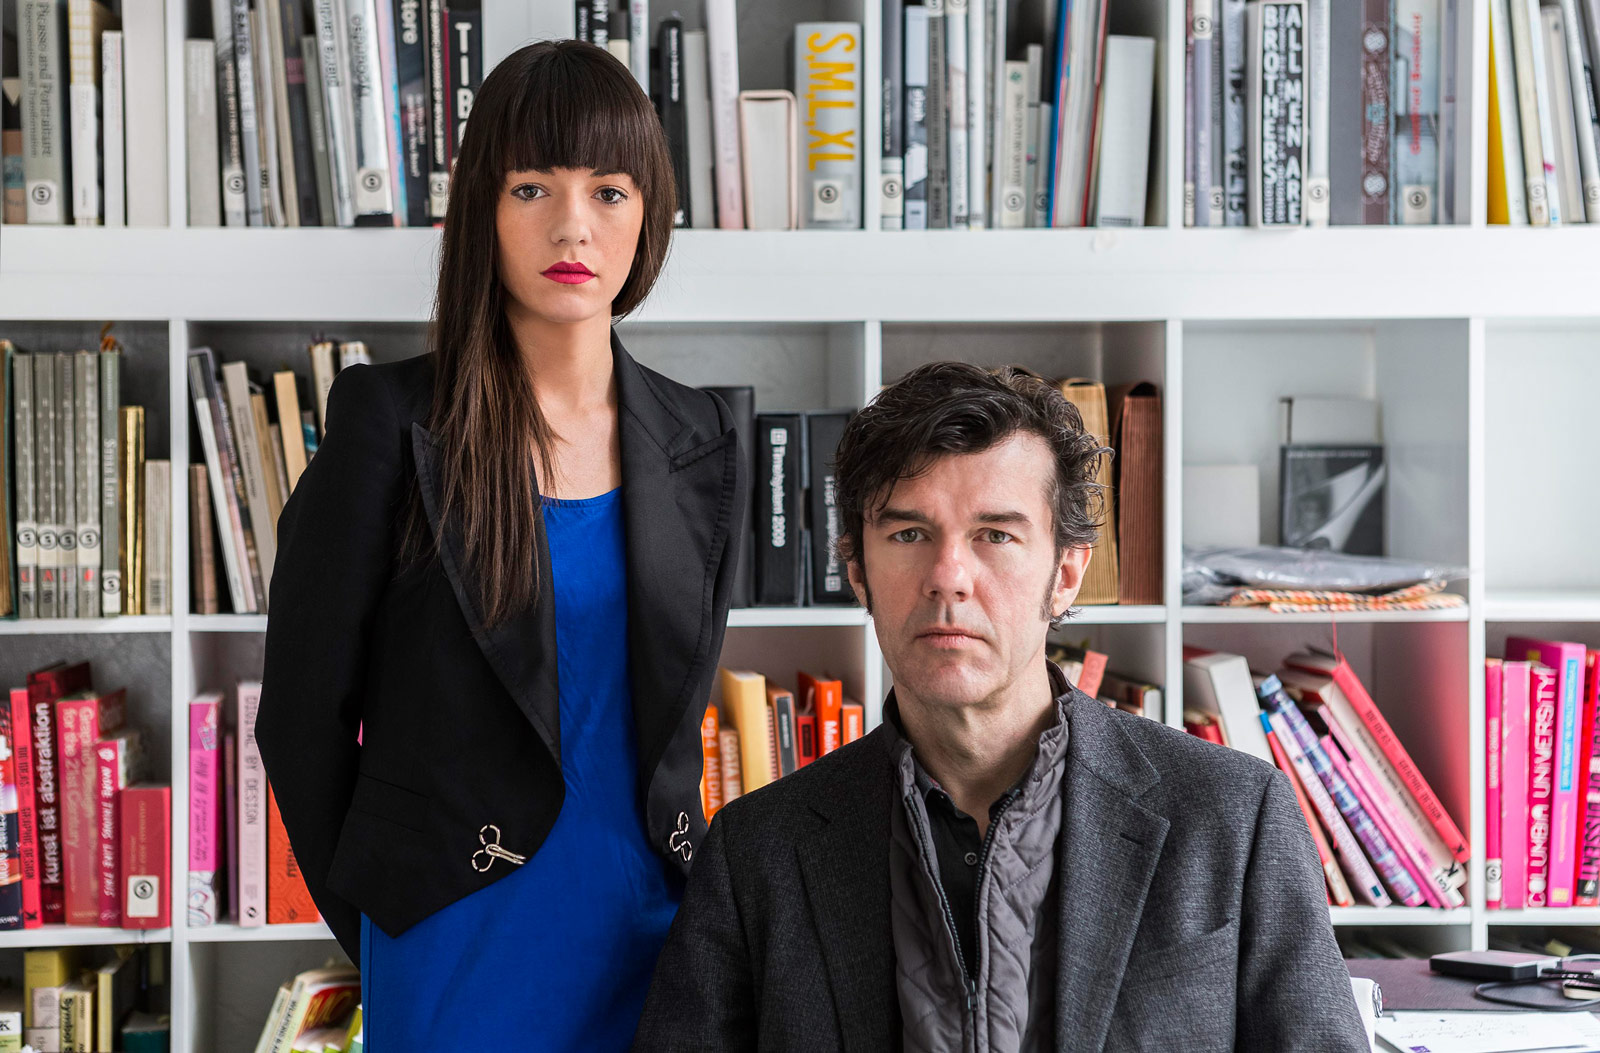 Jessica Walsh and Stefan Sagmeister